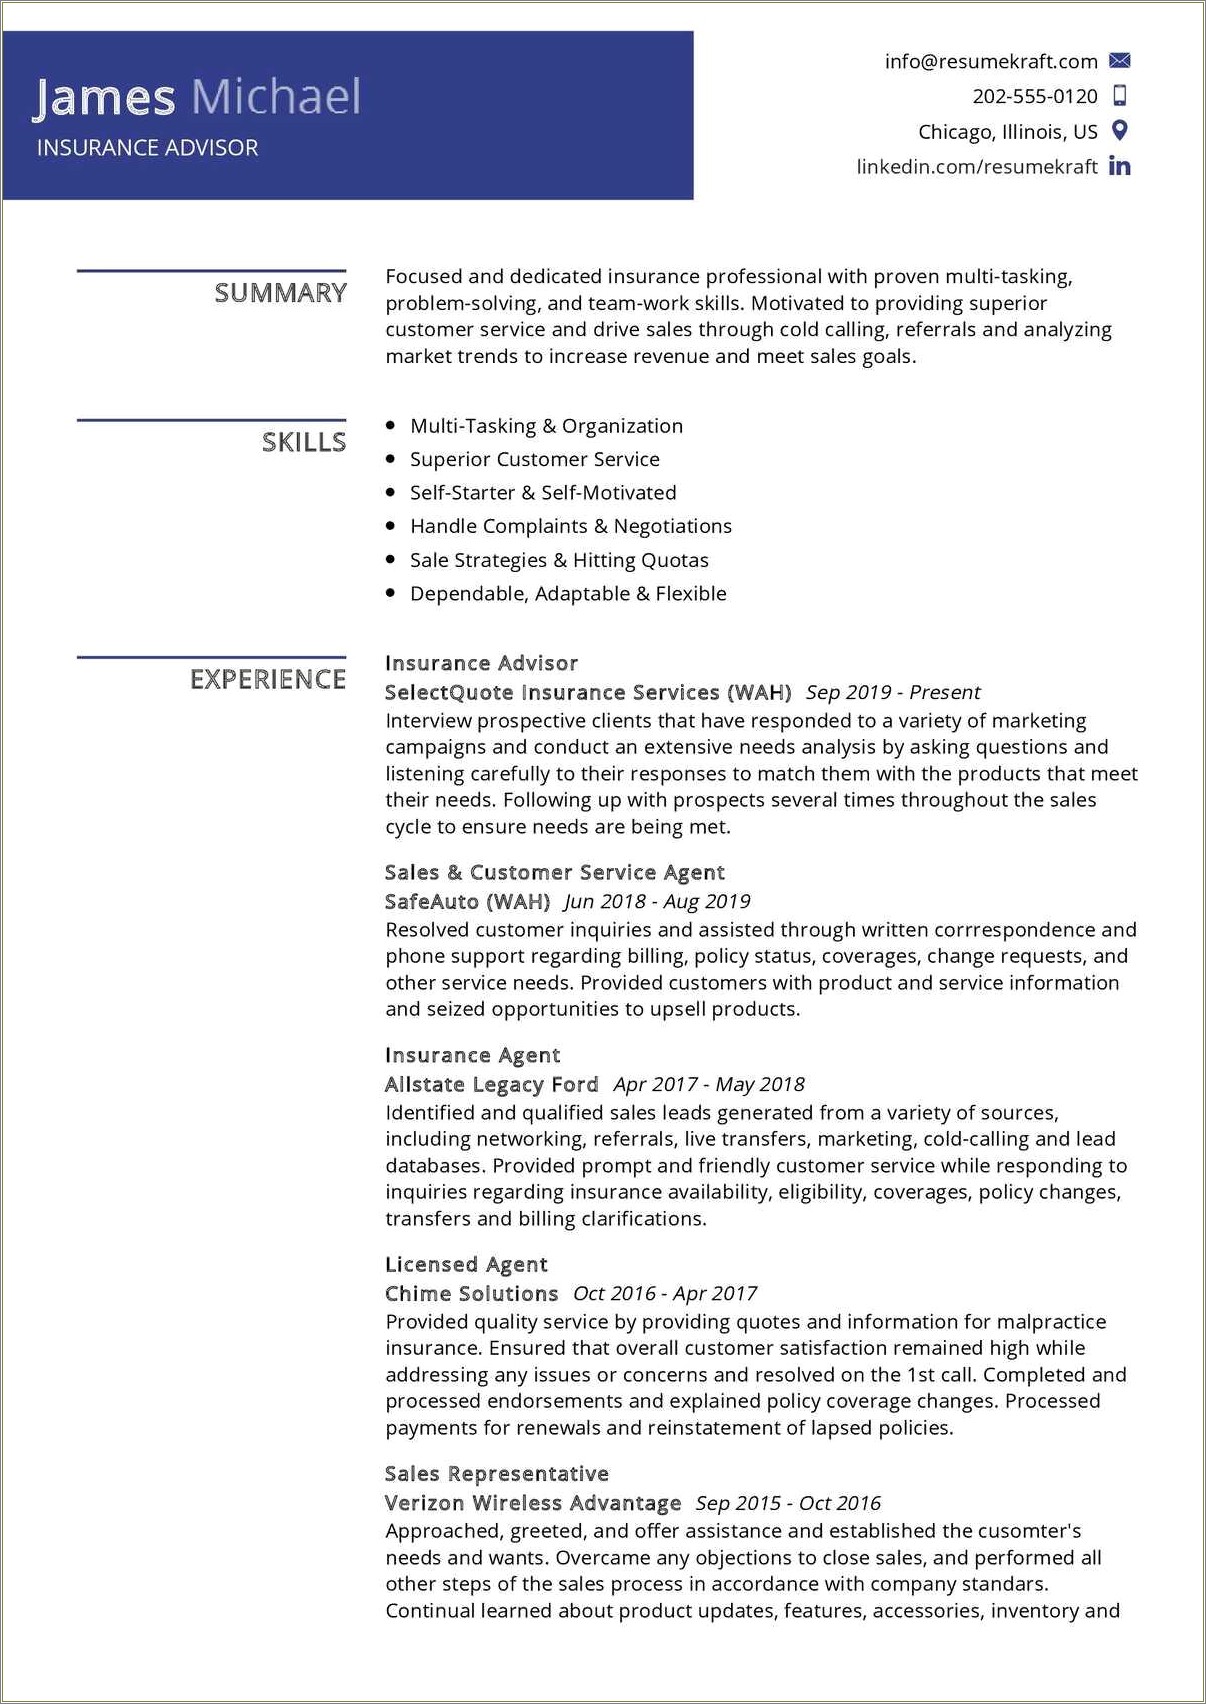 Eligible To Work In The Us Resume